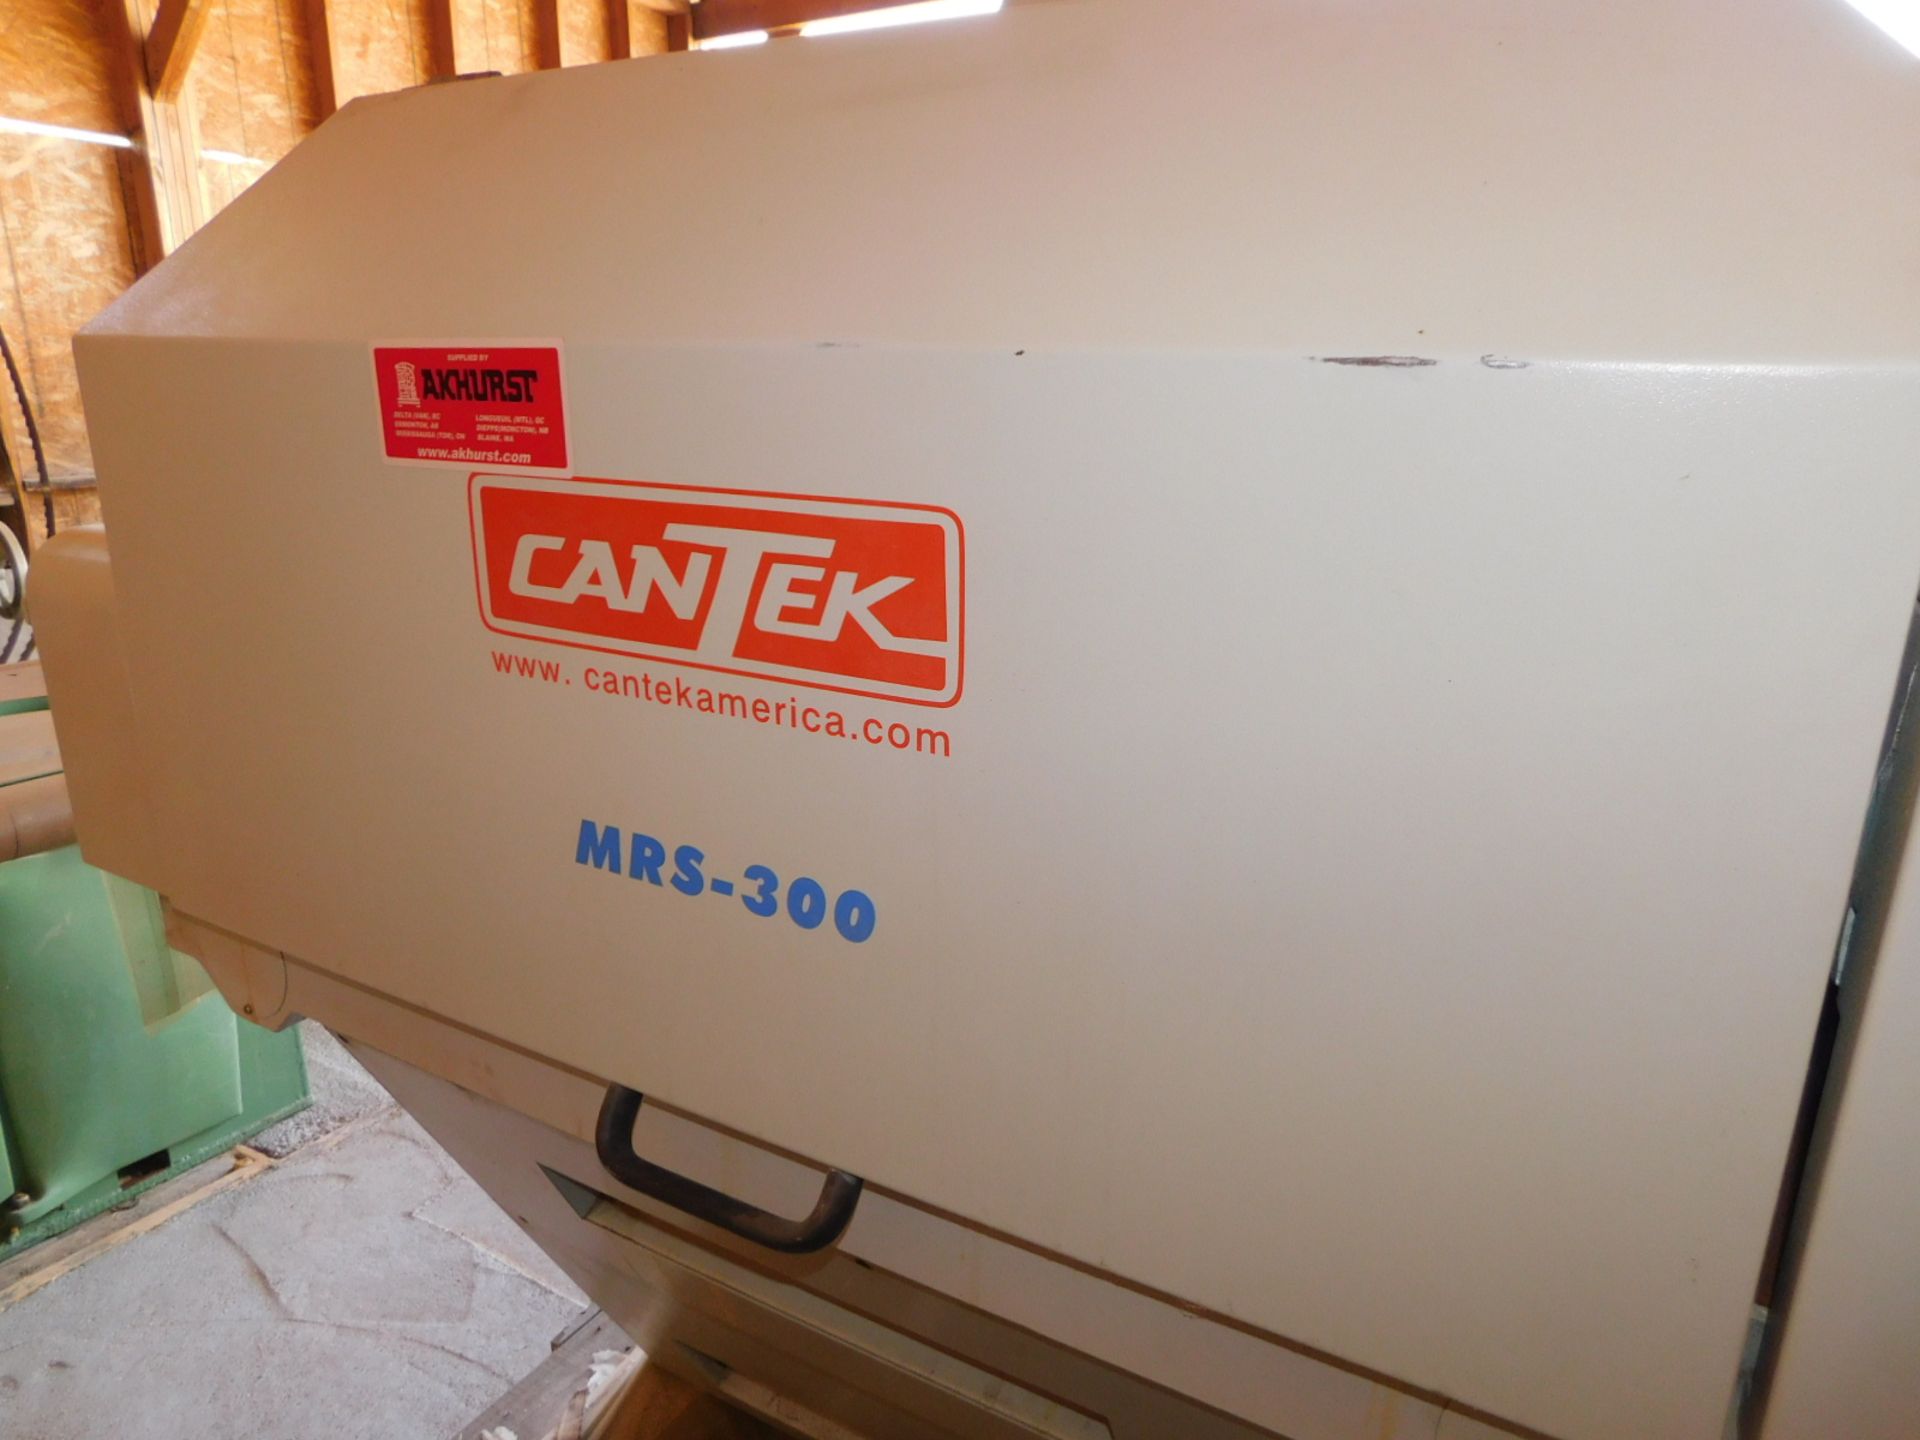 2018 CANTEK MRS-300 MULTIRIP SAW, 50HP, 575V, S/N 12-14312104, 12" CHAIN FEED, C/W TOOLING IN BOX - Image 9 of 10